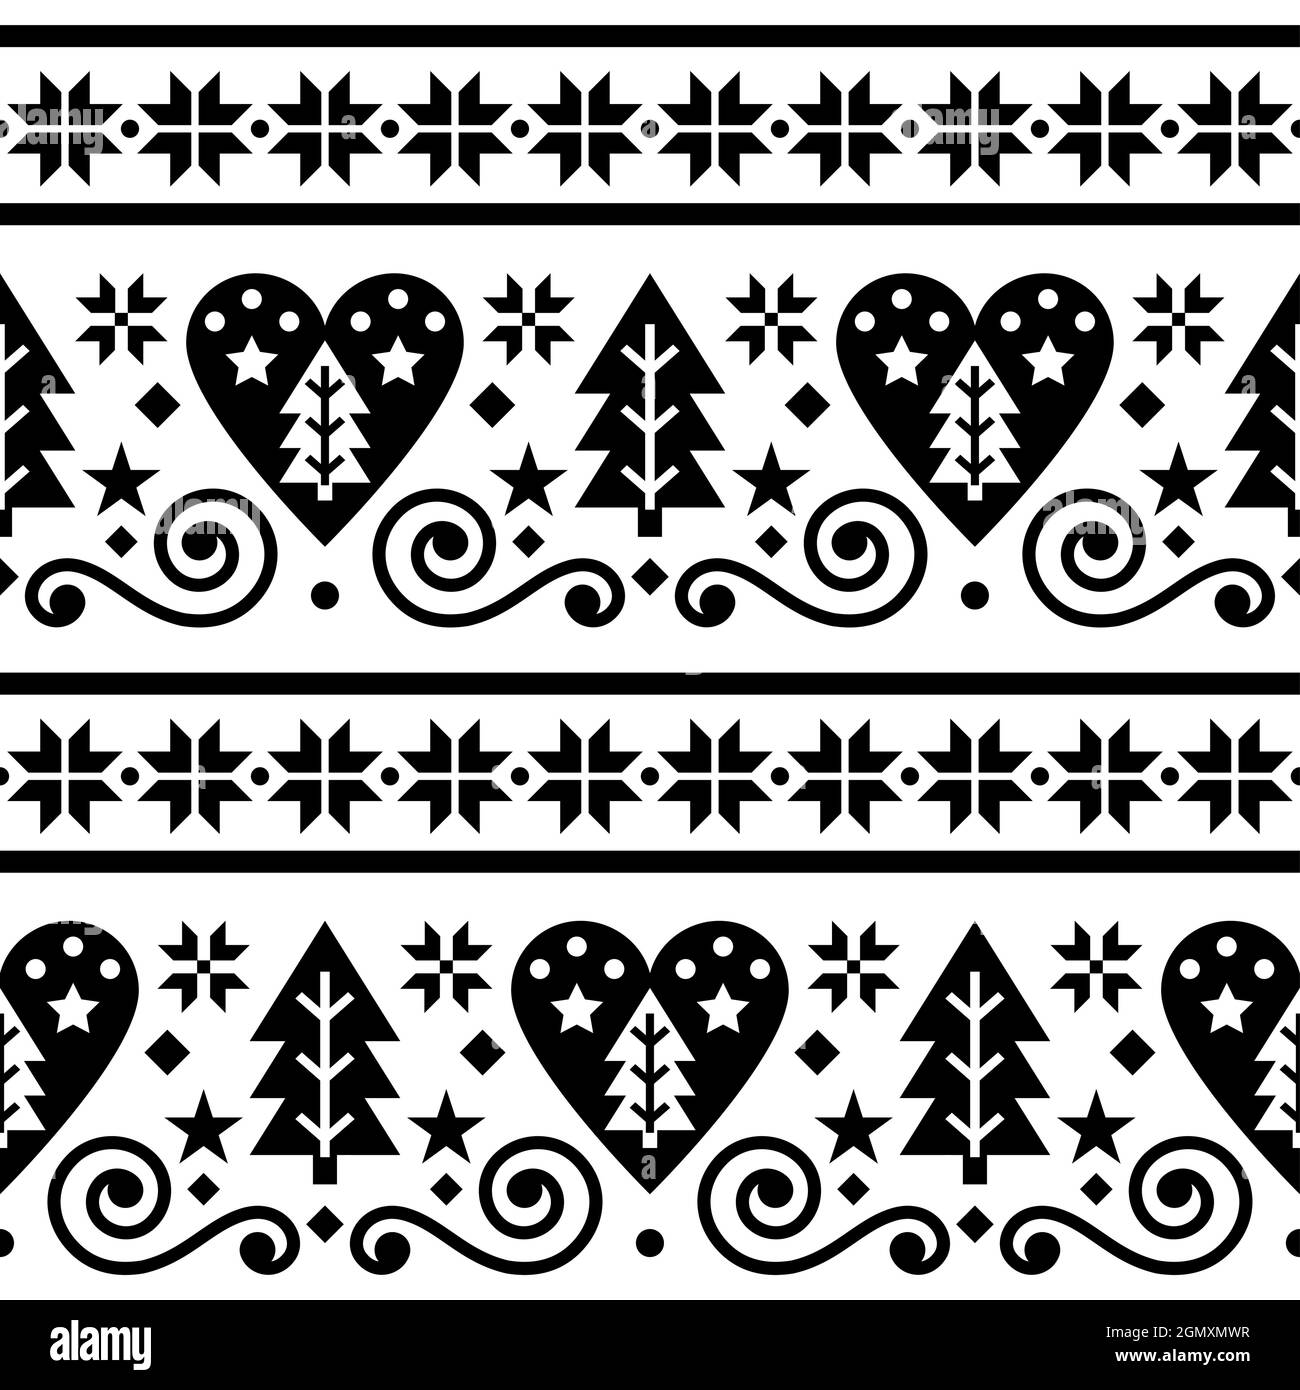 Scandinavian Christmas folk seamless vector pattern, repetitive floral cute Nordic design with Christmas trees, snowflakes and hearts in black on whit Stock Vector